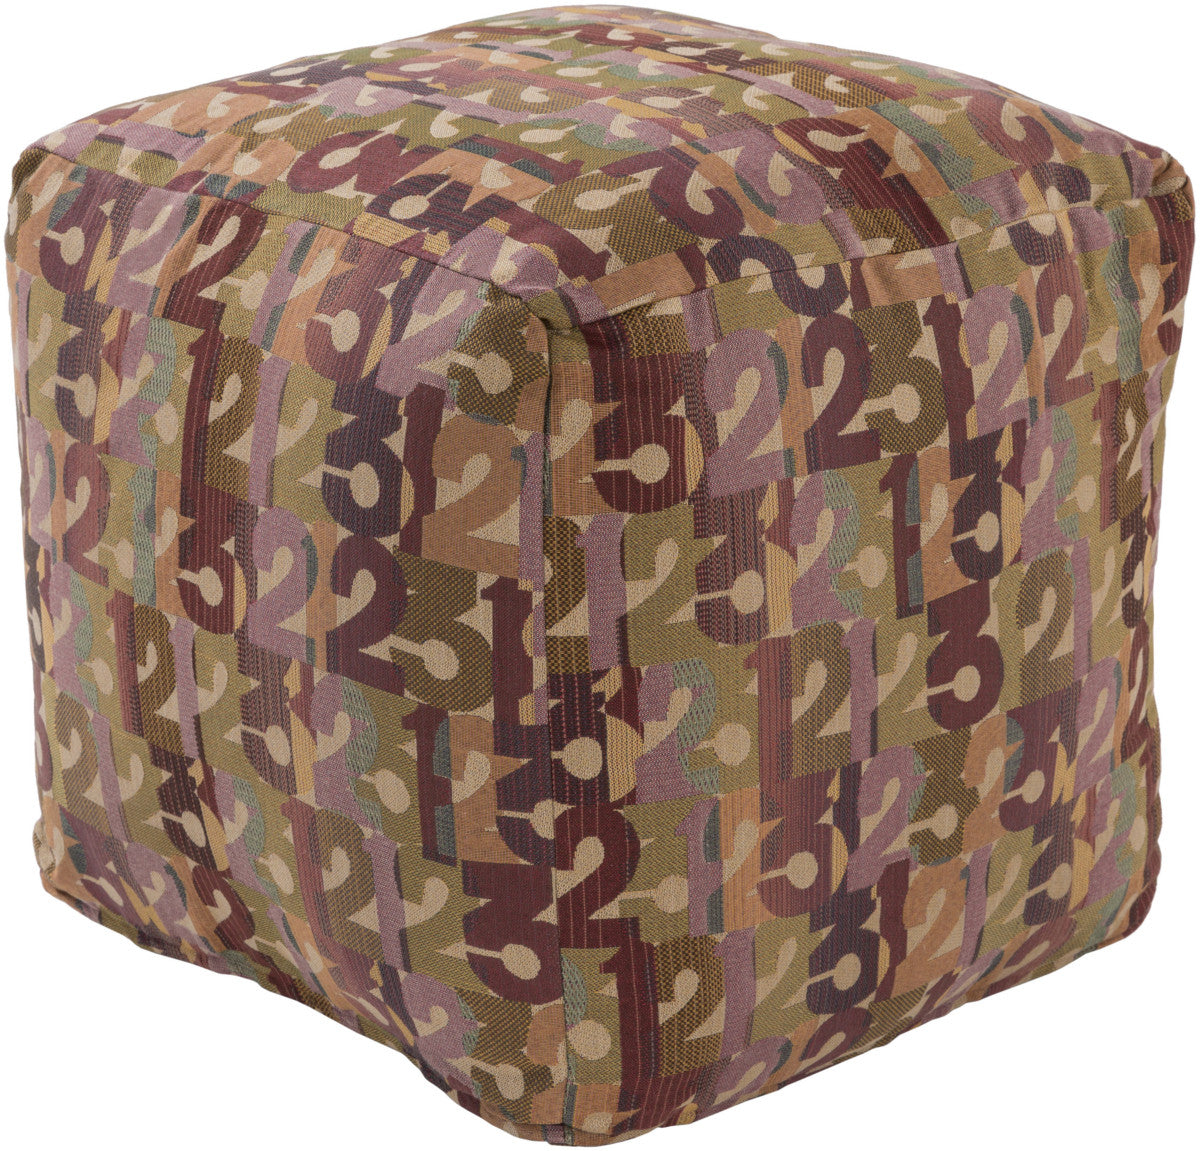 Surya Shoop SHPF-002 Multi-Color Pouf by Mike Farrell